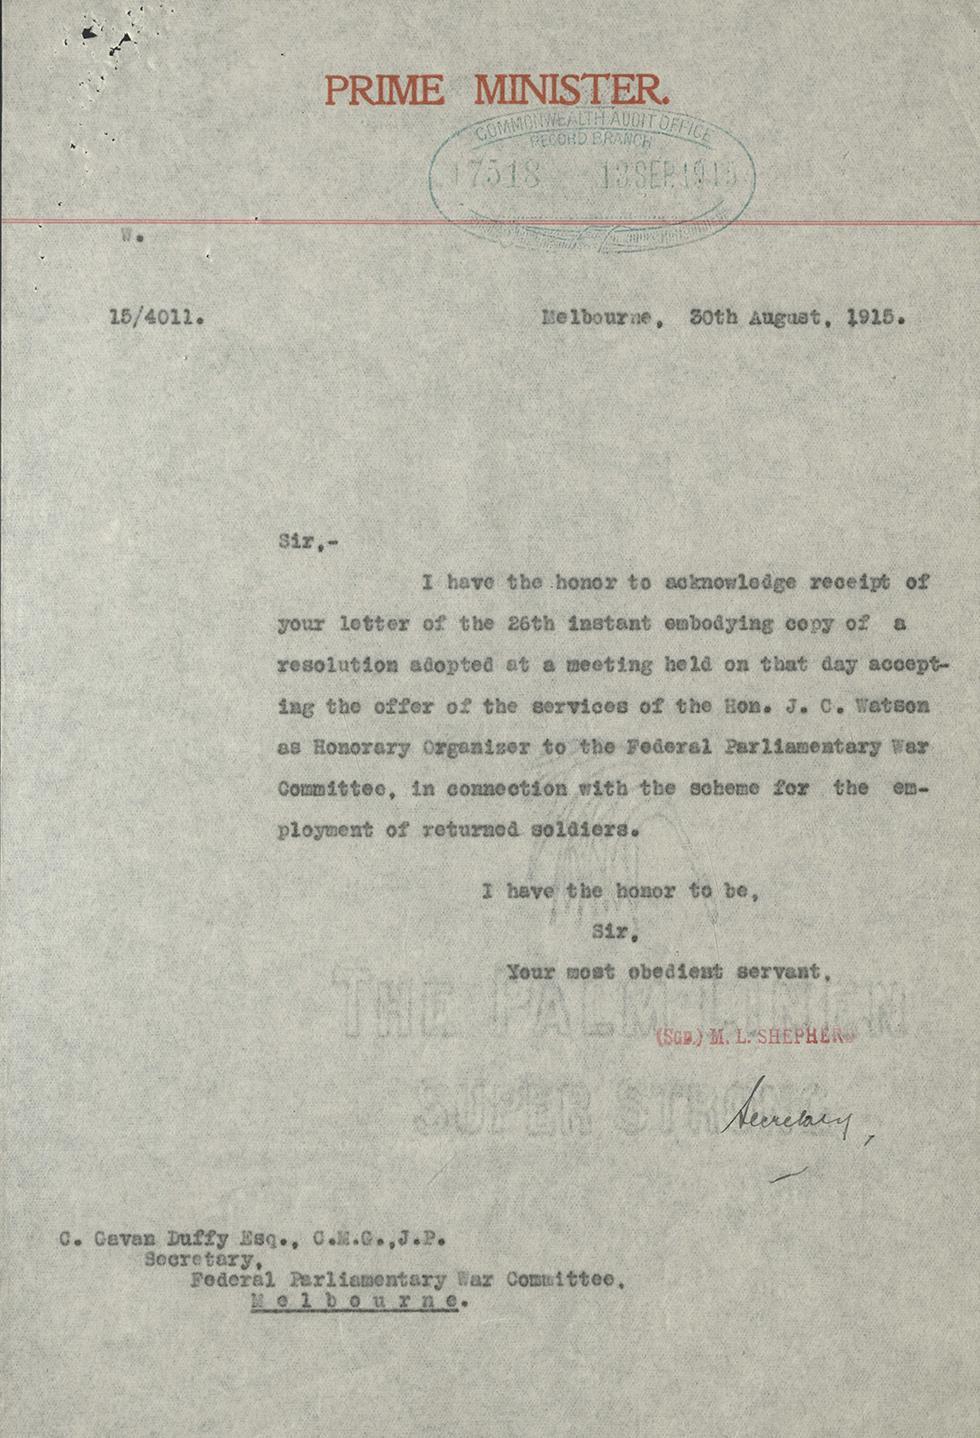 Letter announcing the Parliamentary War Committee's acceptance of Watson's services for the employment of returned soldiers